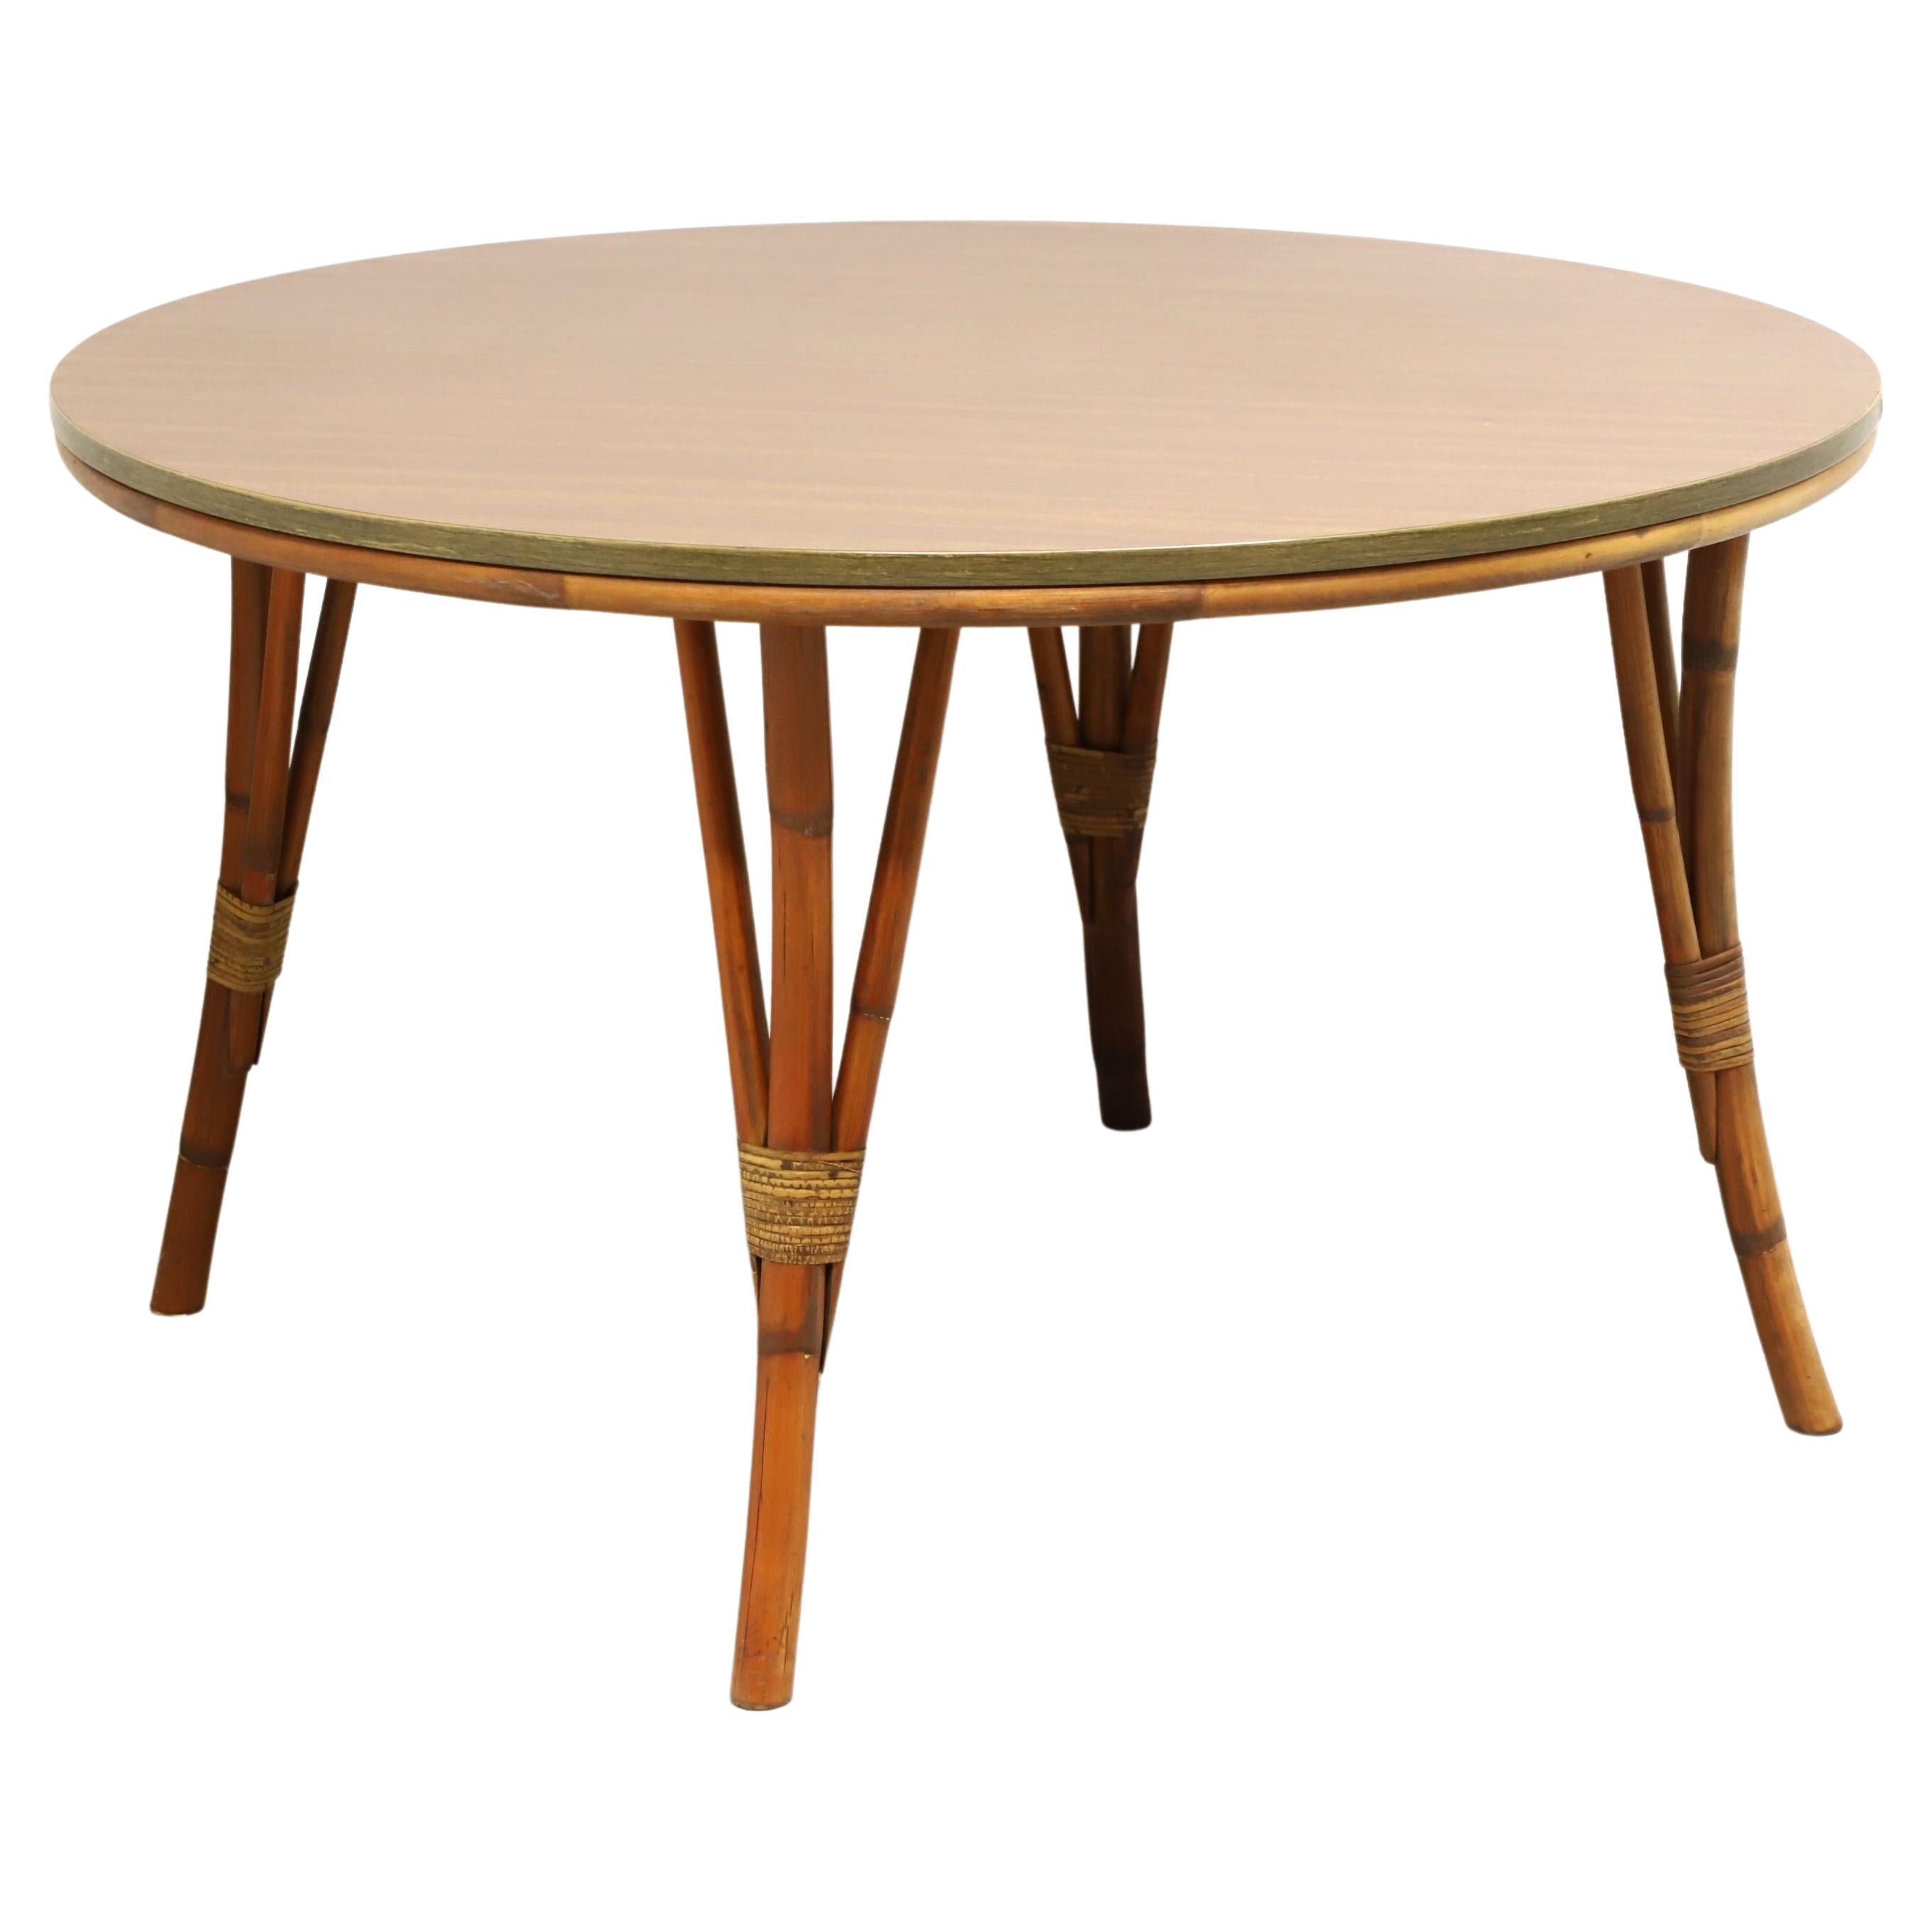 BAM-TAN 1960's Rattan Round Dining Table For Sale